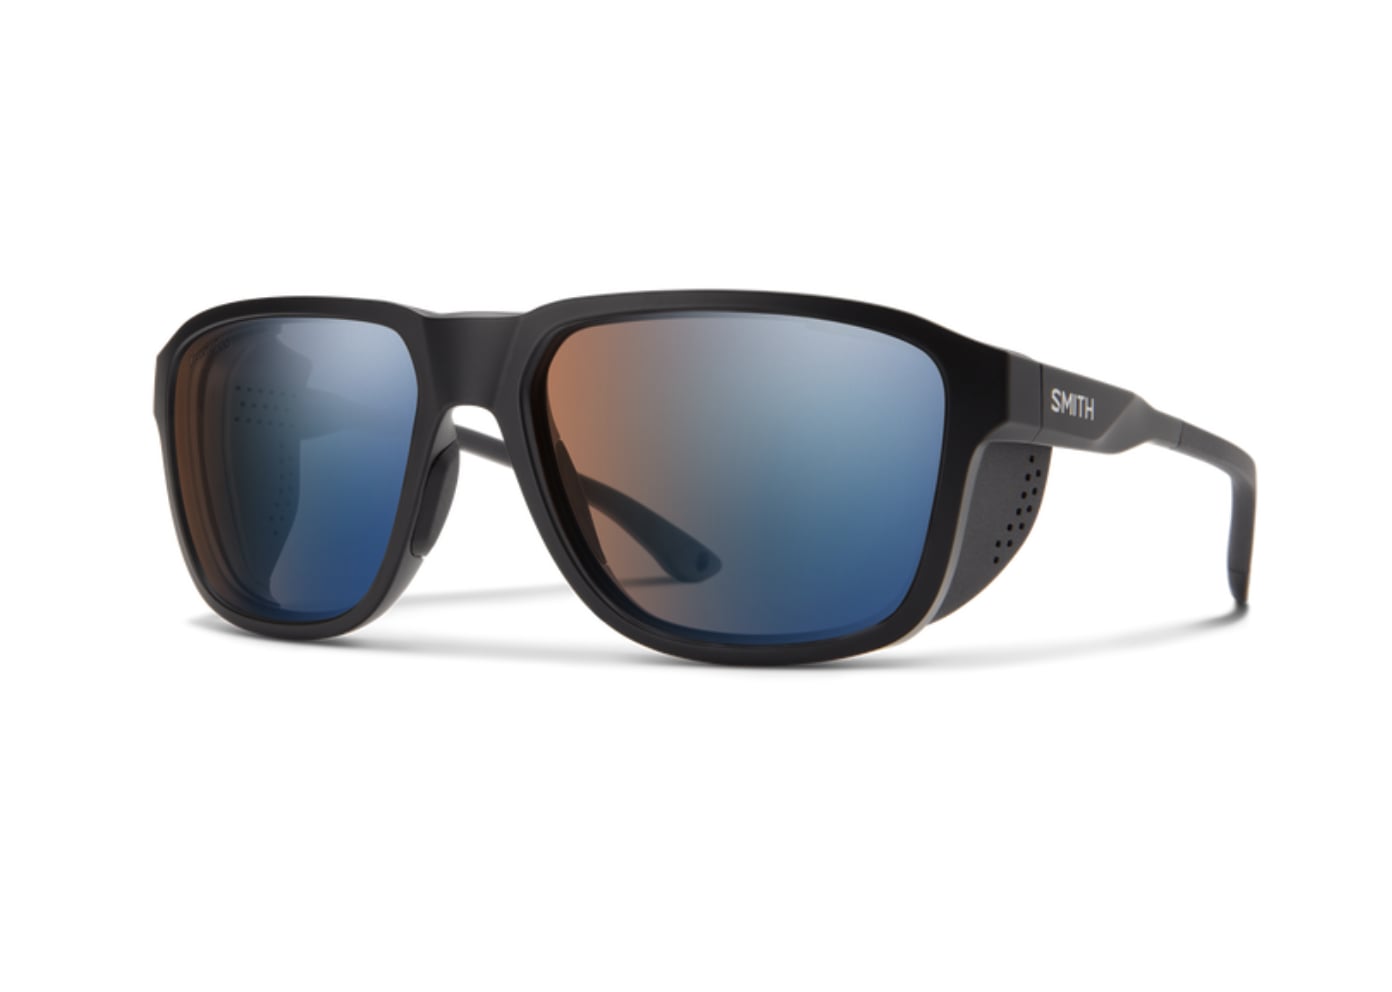 <p><a href="http://www.smithoptics.com/en_US/p/sunglass/embark-performance-sunglass/20461700358QG.html">BUY NOW</a></p><p>$239</p><p><a href="http://www.smithoptics.com/en_US/p/sunglass/embark-performance-sunglass/20461700358QG.html" class="ga-track"><strong>Smith Optics Embark</strong></a> ($239)</p> <p>Make sure to protect your eyes with a good pair of shades. These performance glacier-friendly glasses are designed to withstand harsh and ever-changing conditions while offering a view that enhances contrast, allowing you to perceive every crevasse, wind drift, and terrain feature.</p>